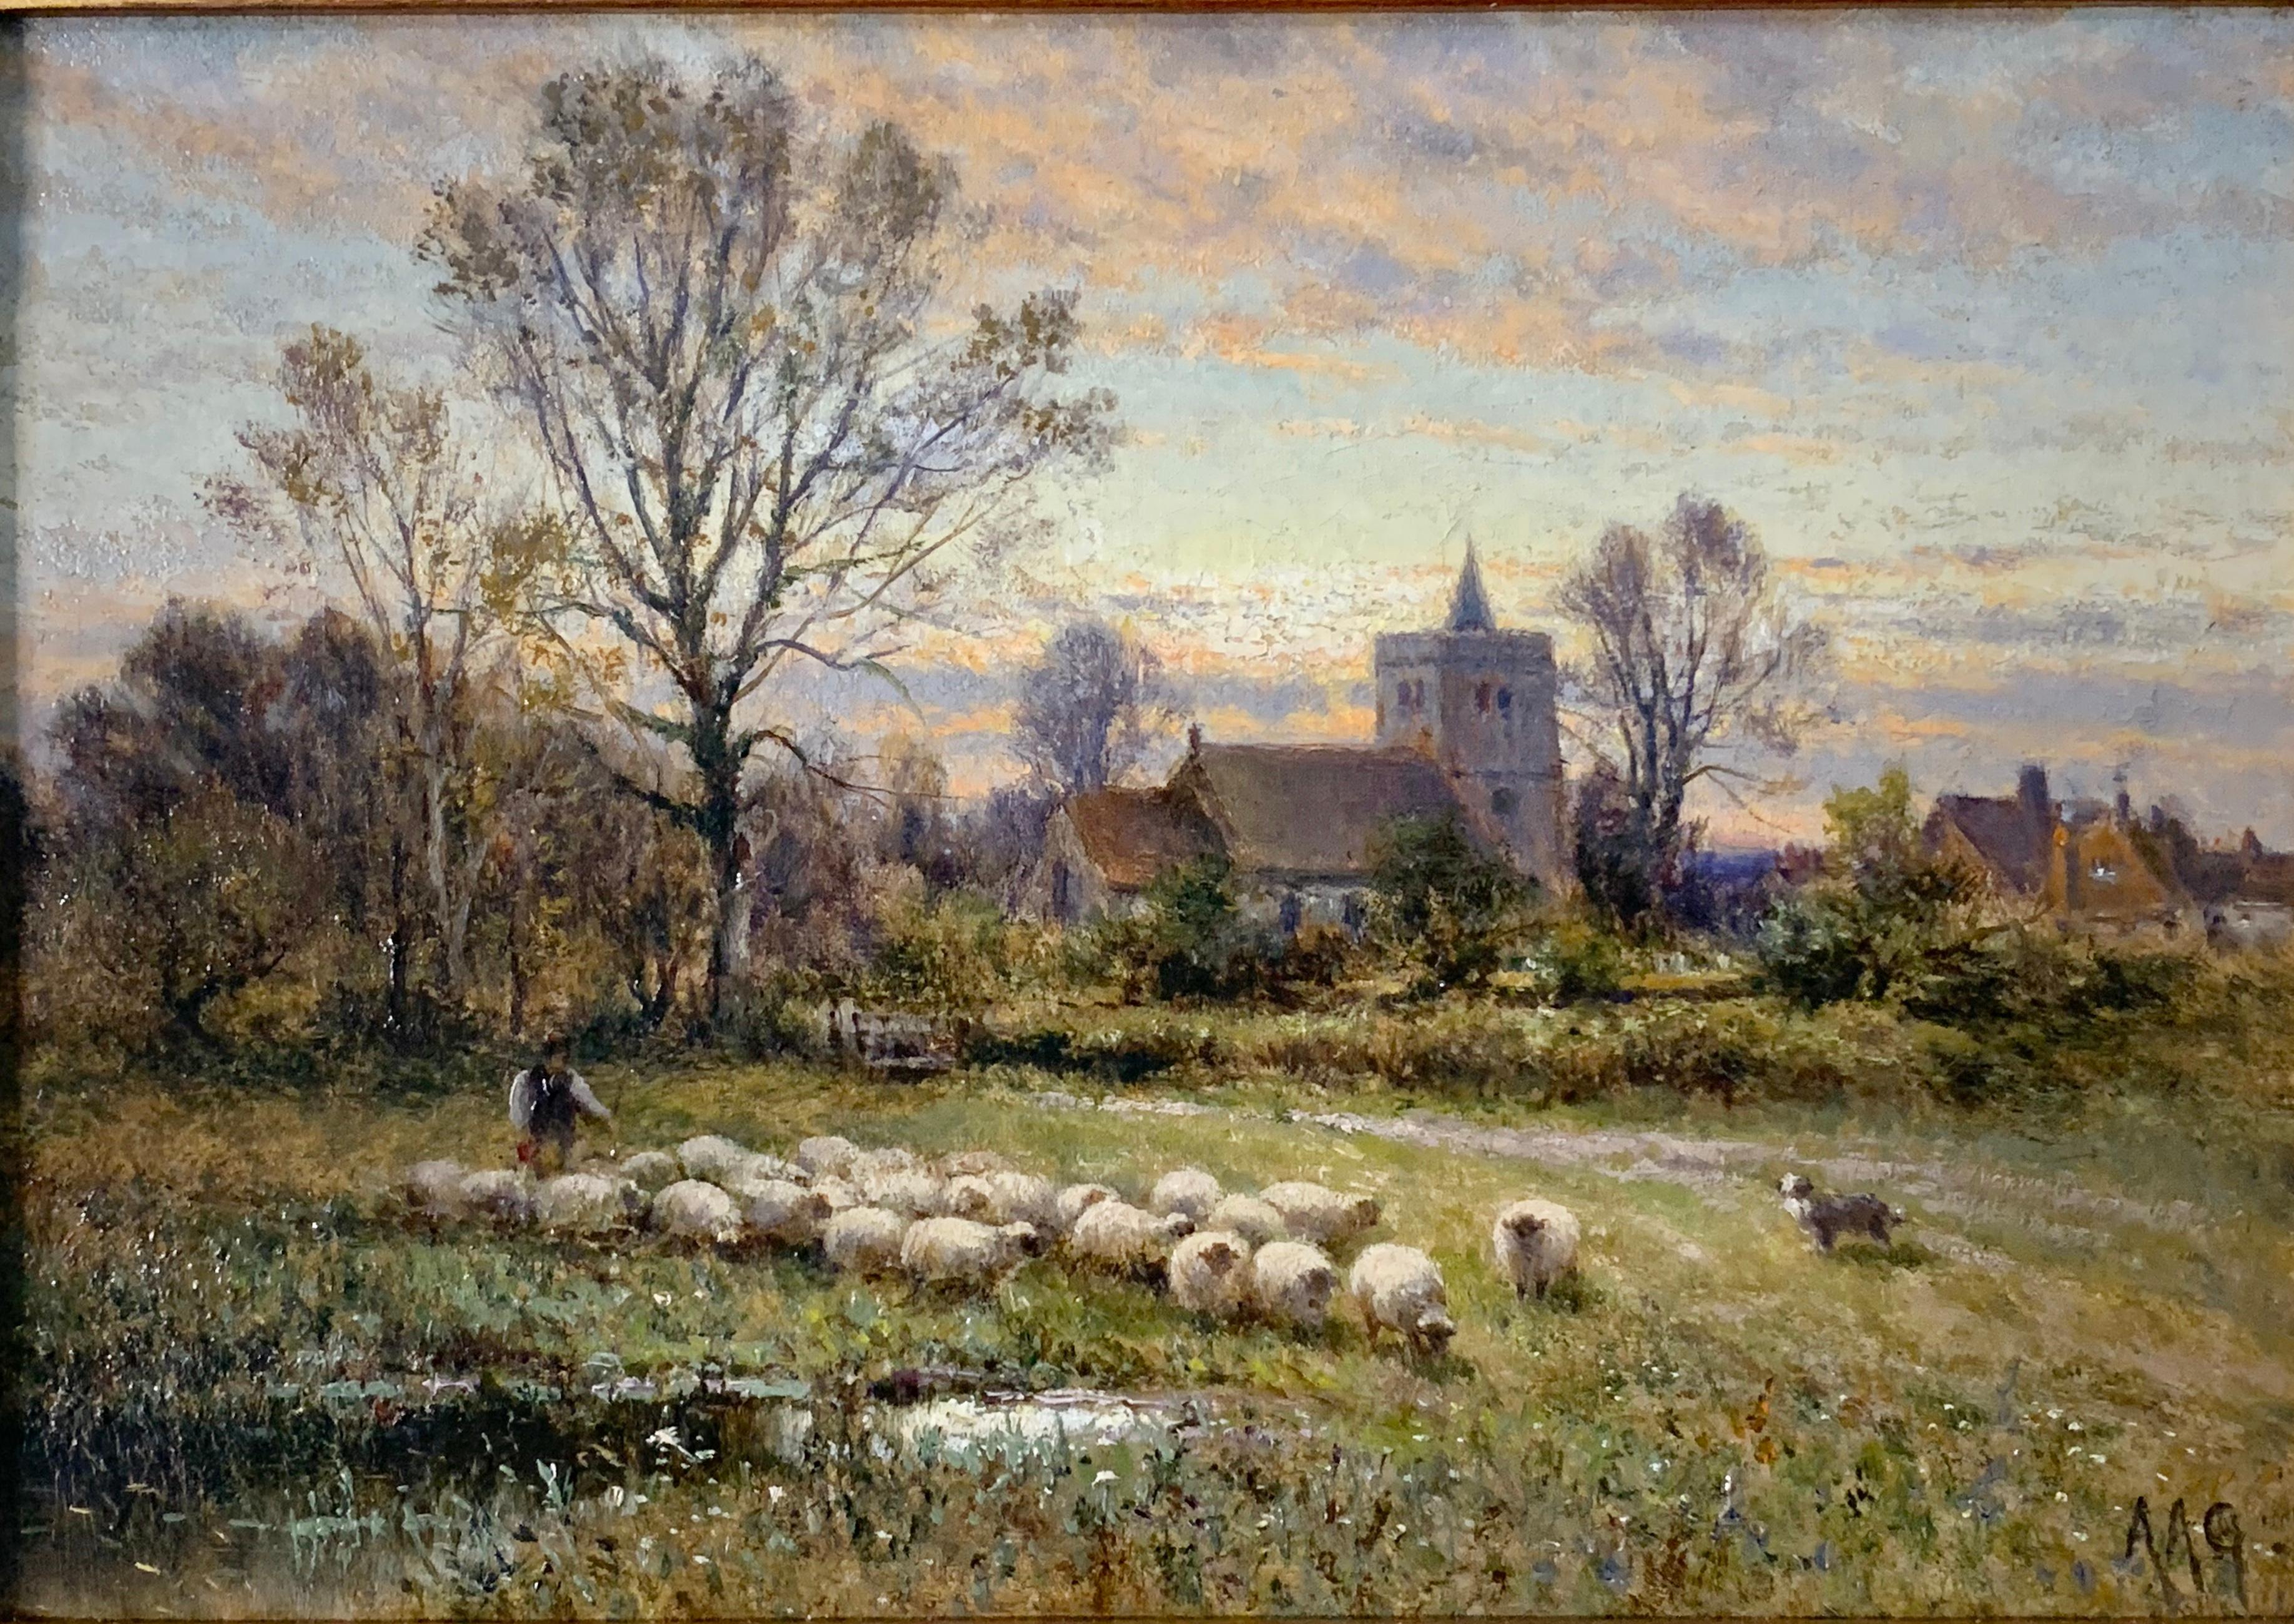 Alfred August Glendening Senior (1840-1910) was famously known for his landscape artworks, some of his famous works of art are of different landscapes across Europe. Here we have the landscape of a village, around springtime, and shown is a shepherd